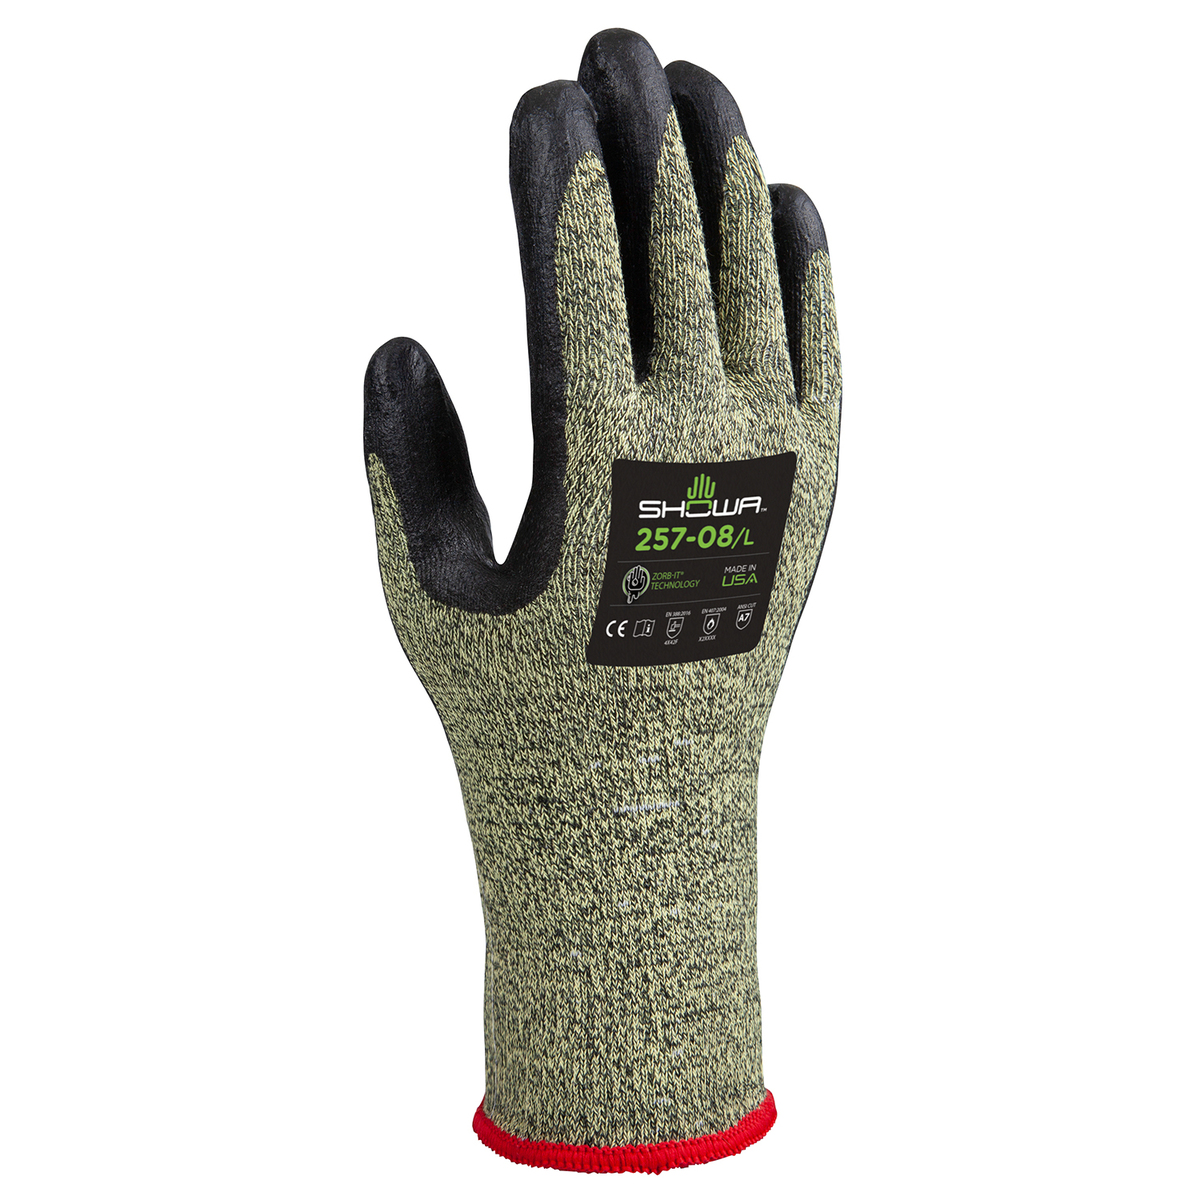 SHOWA® 10 Gauge Spandex, Aramid And Stainless Steel Cut Resistant Gloves With Foam Nitrile Coated Palm